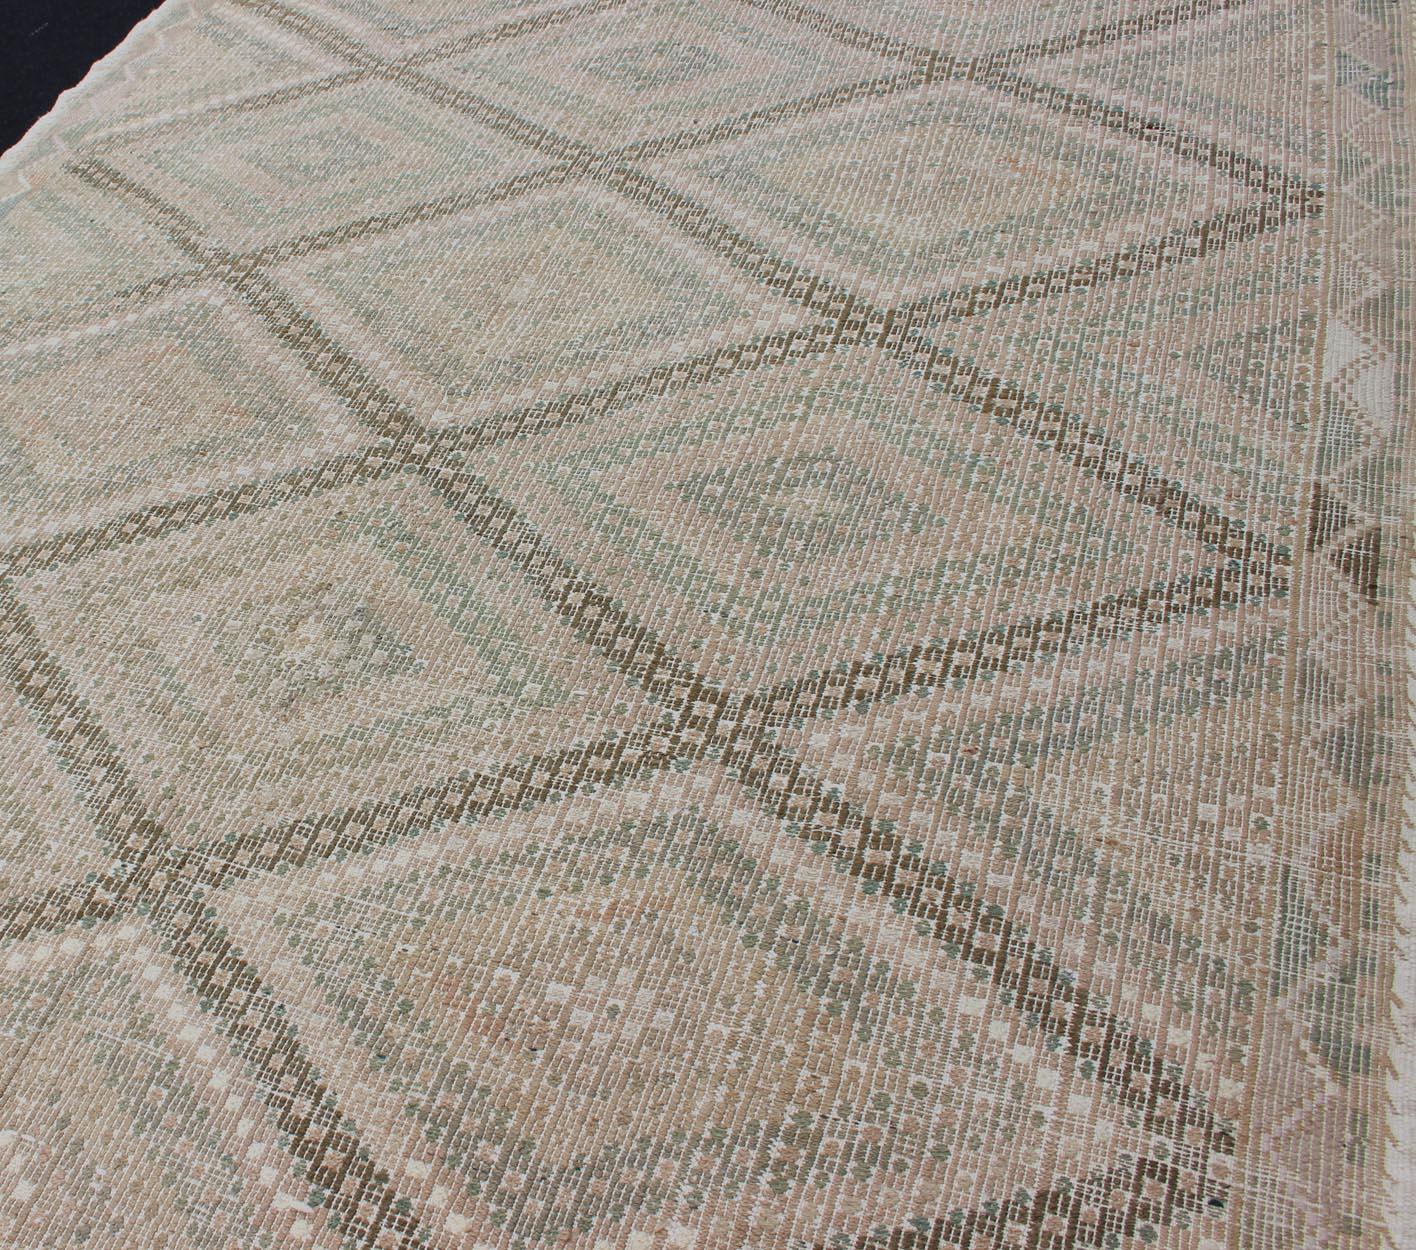 Vintage Turkish Embroidered Rug with Geometric Diamond Design in Light Colors For Sale 1